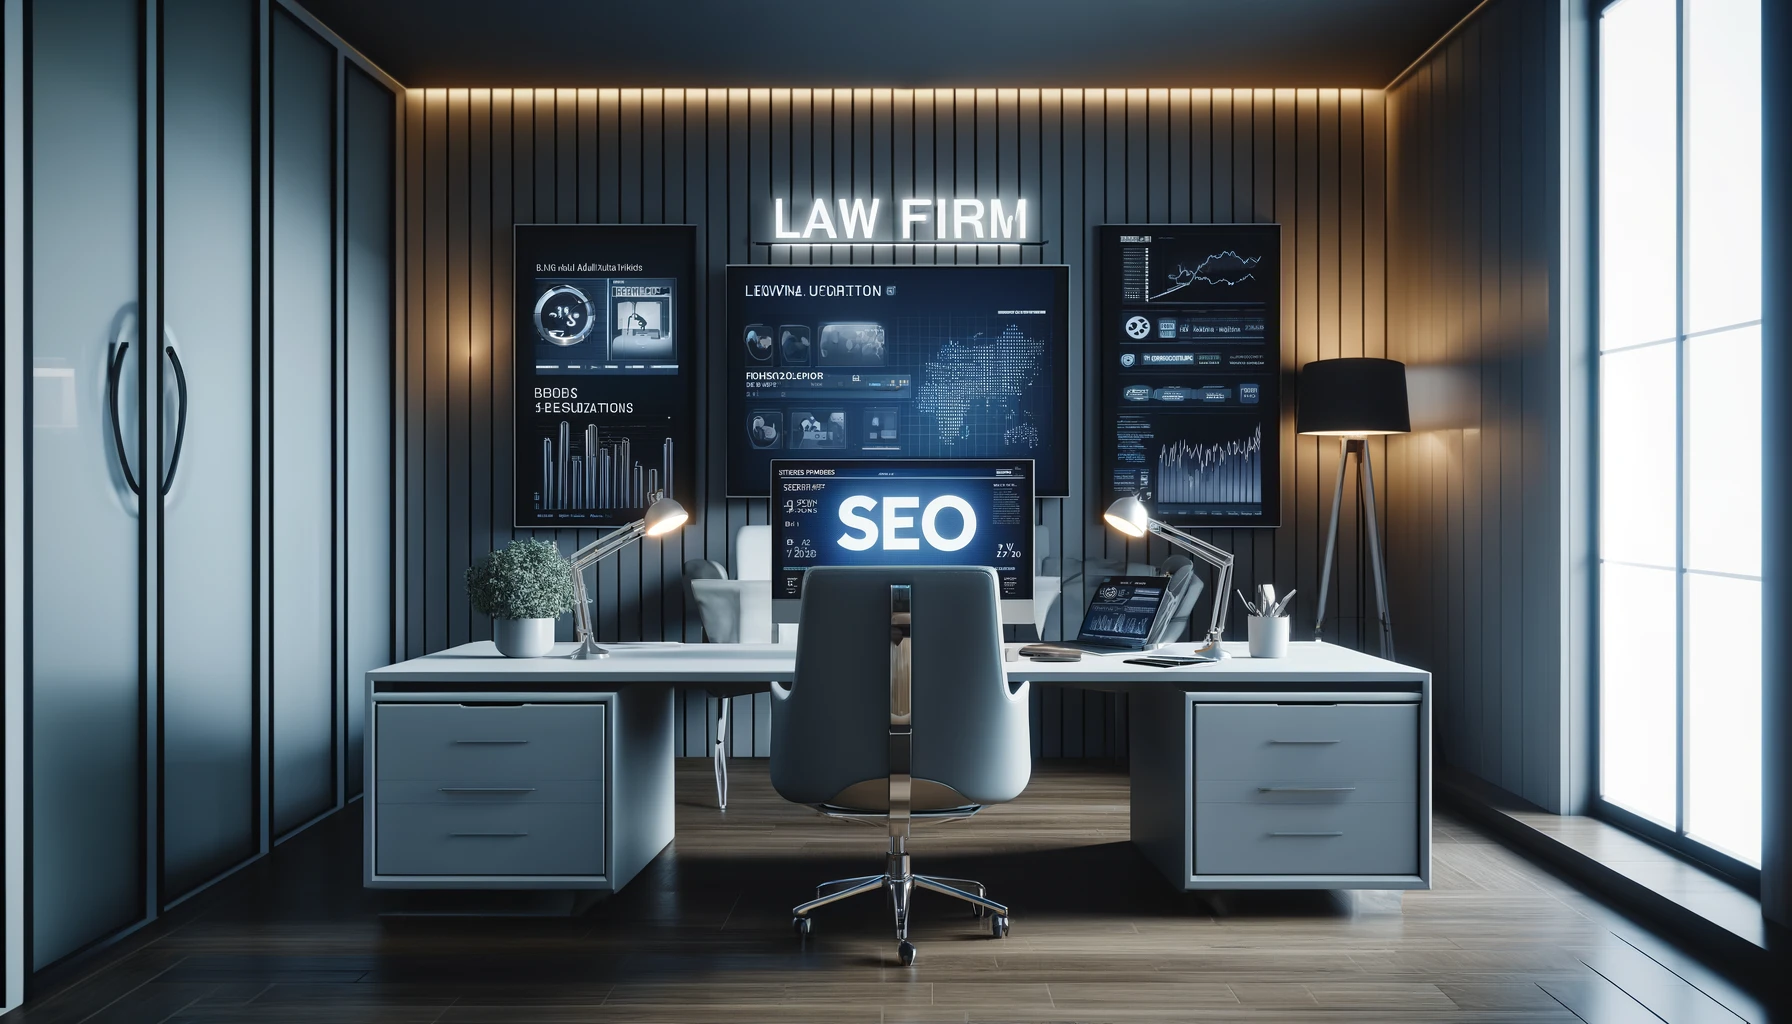 a law firm marketing company using a marketing budget with client reviews form new clients, existing clients and law firm clients in search engines